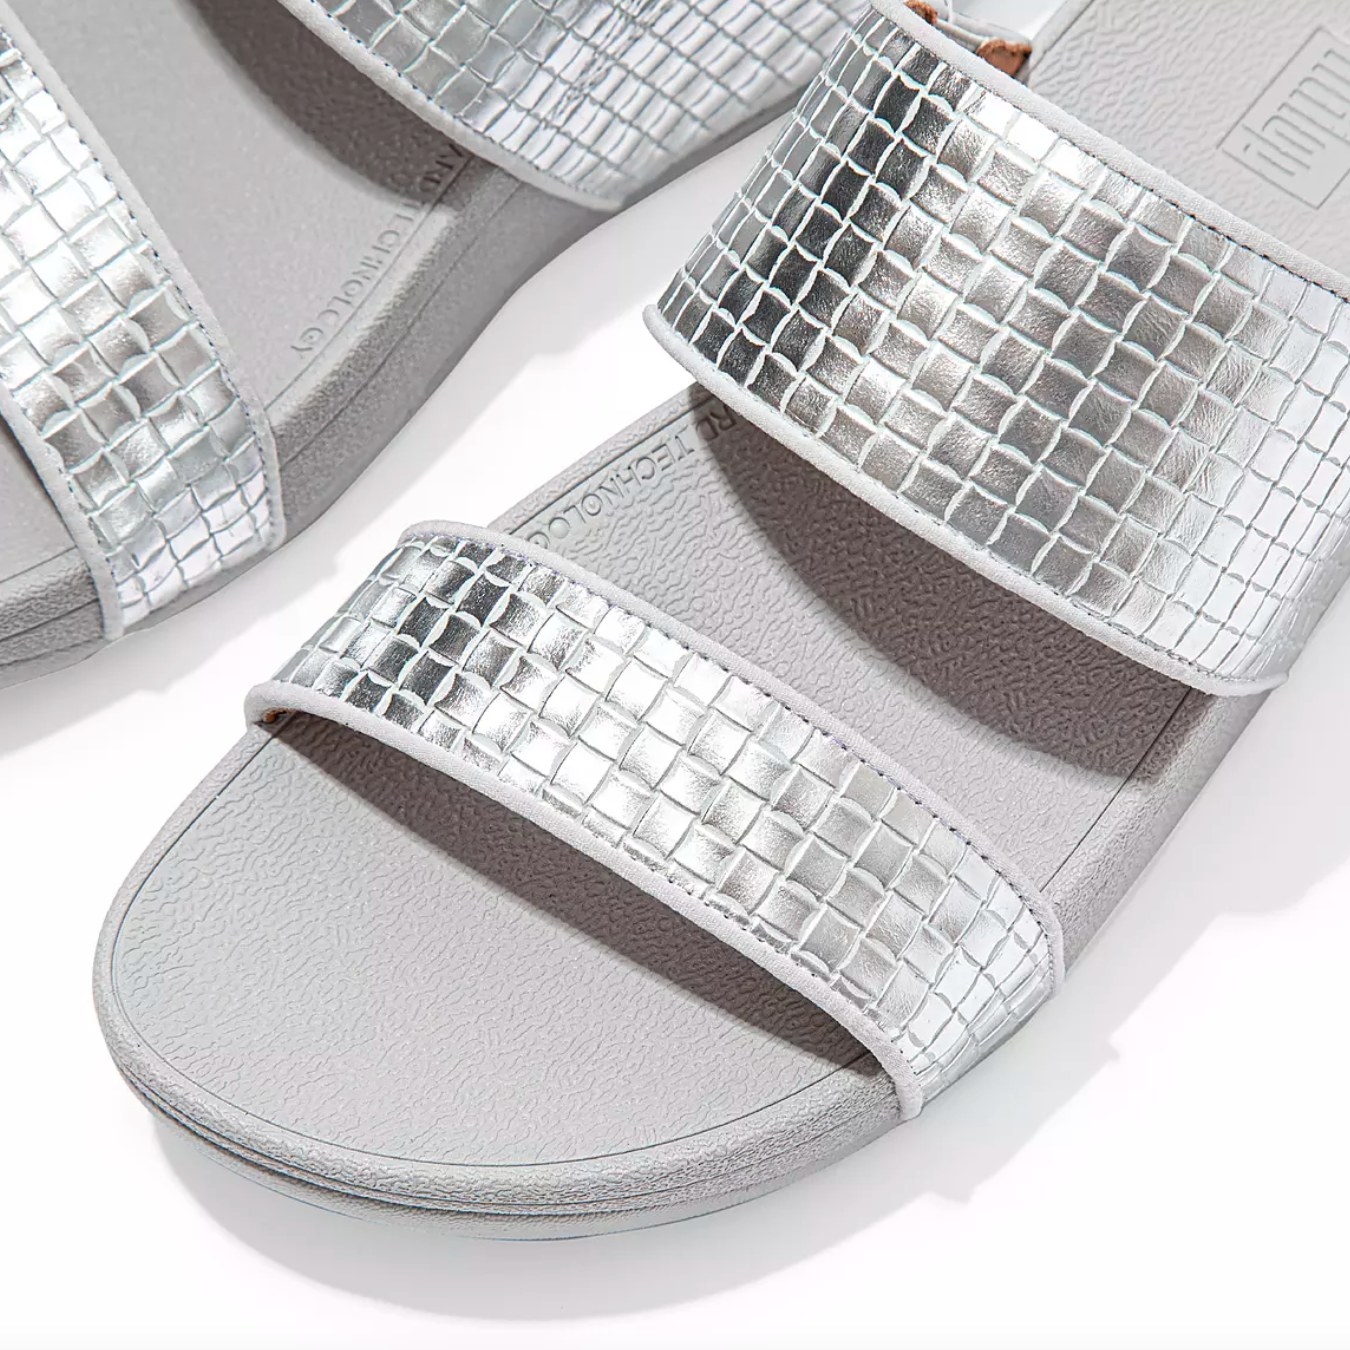 The pair of metallic leather slides in silver